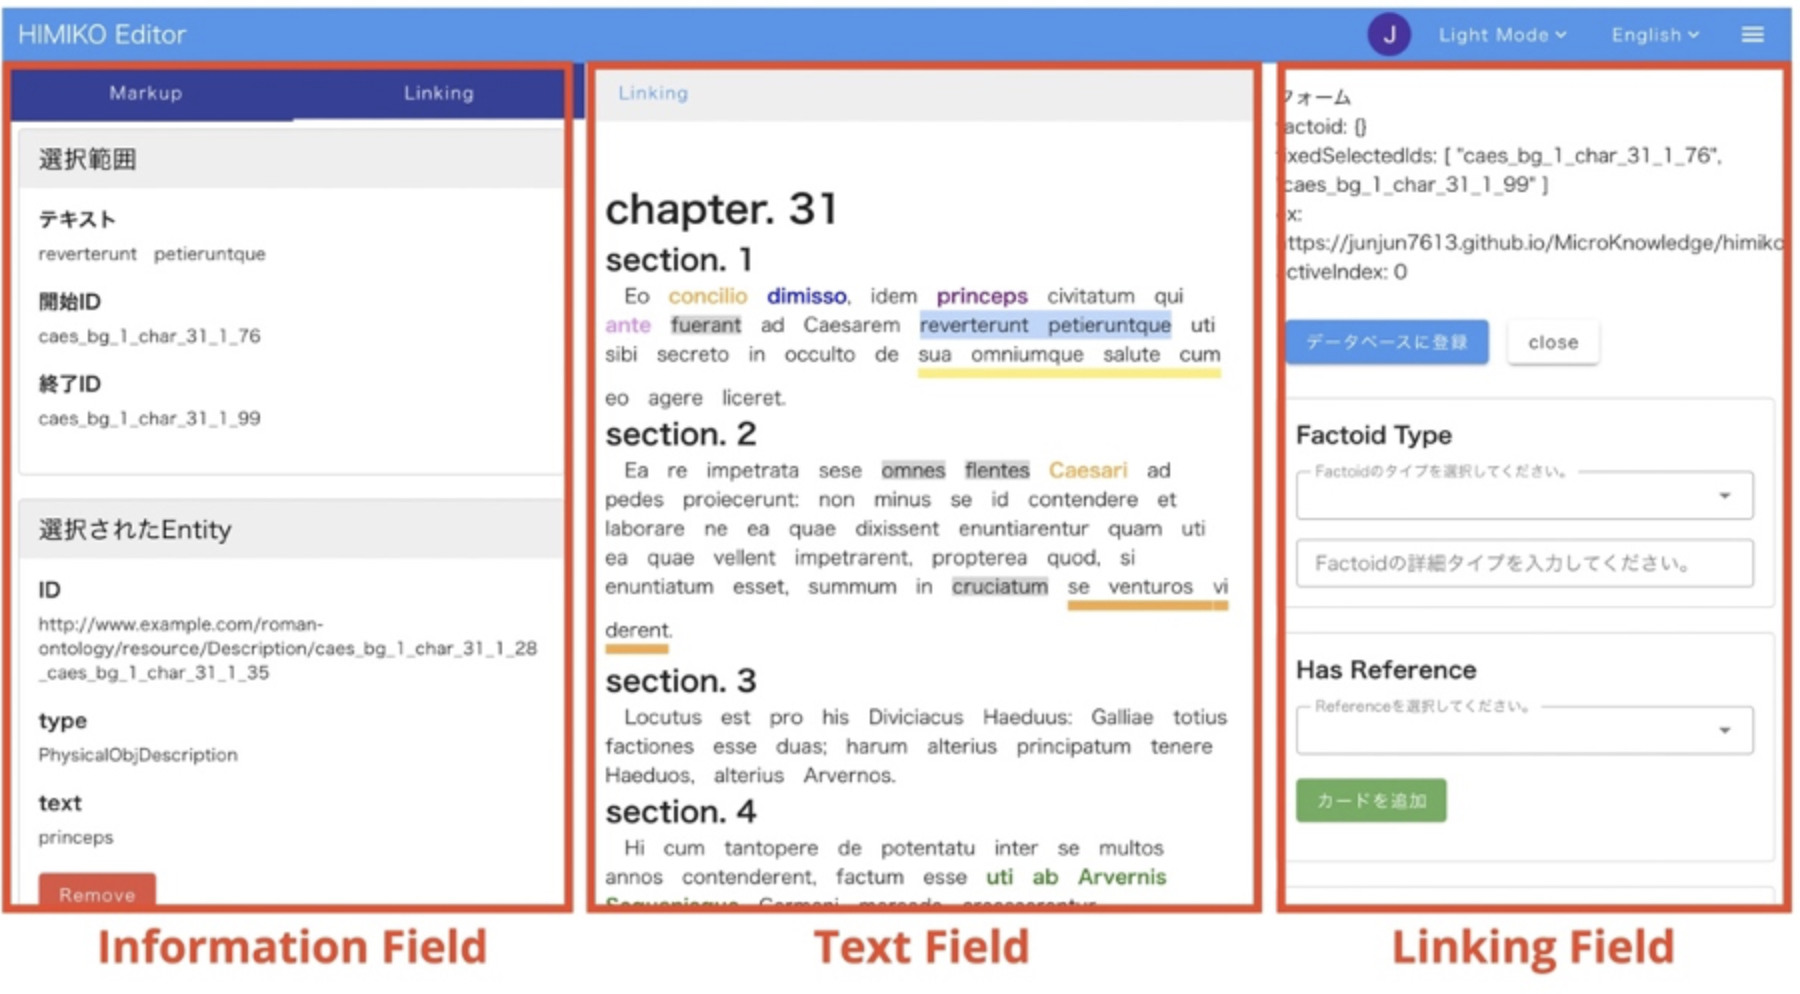 Fig. 4: Interface view of our editor